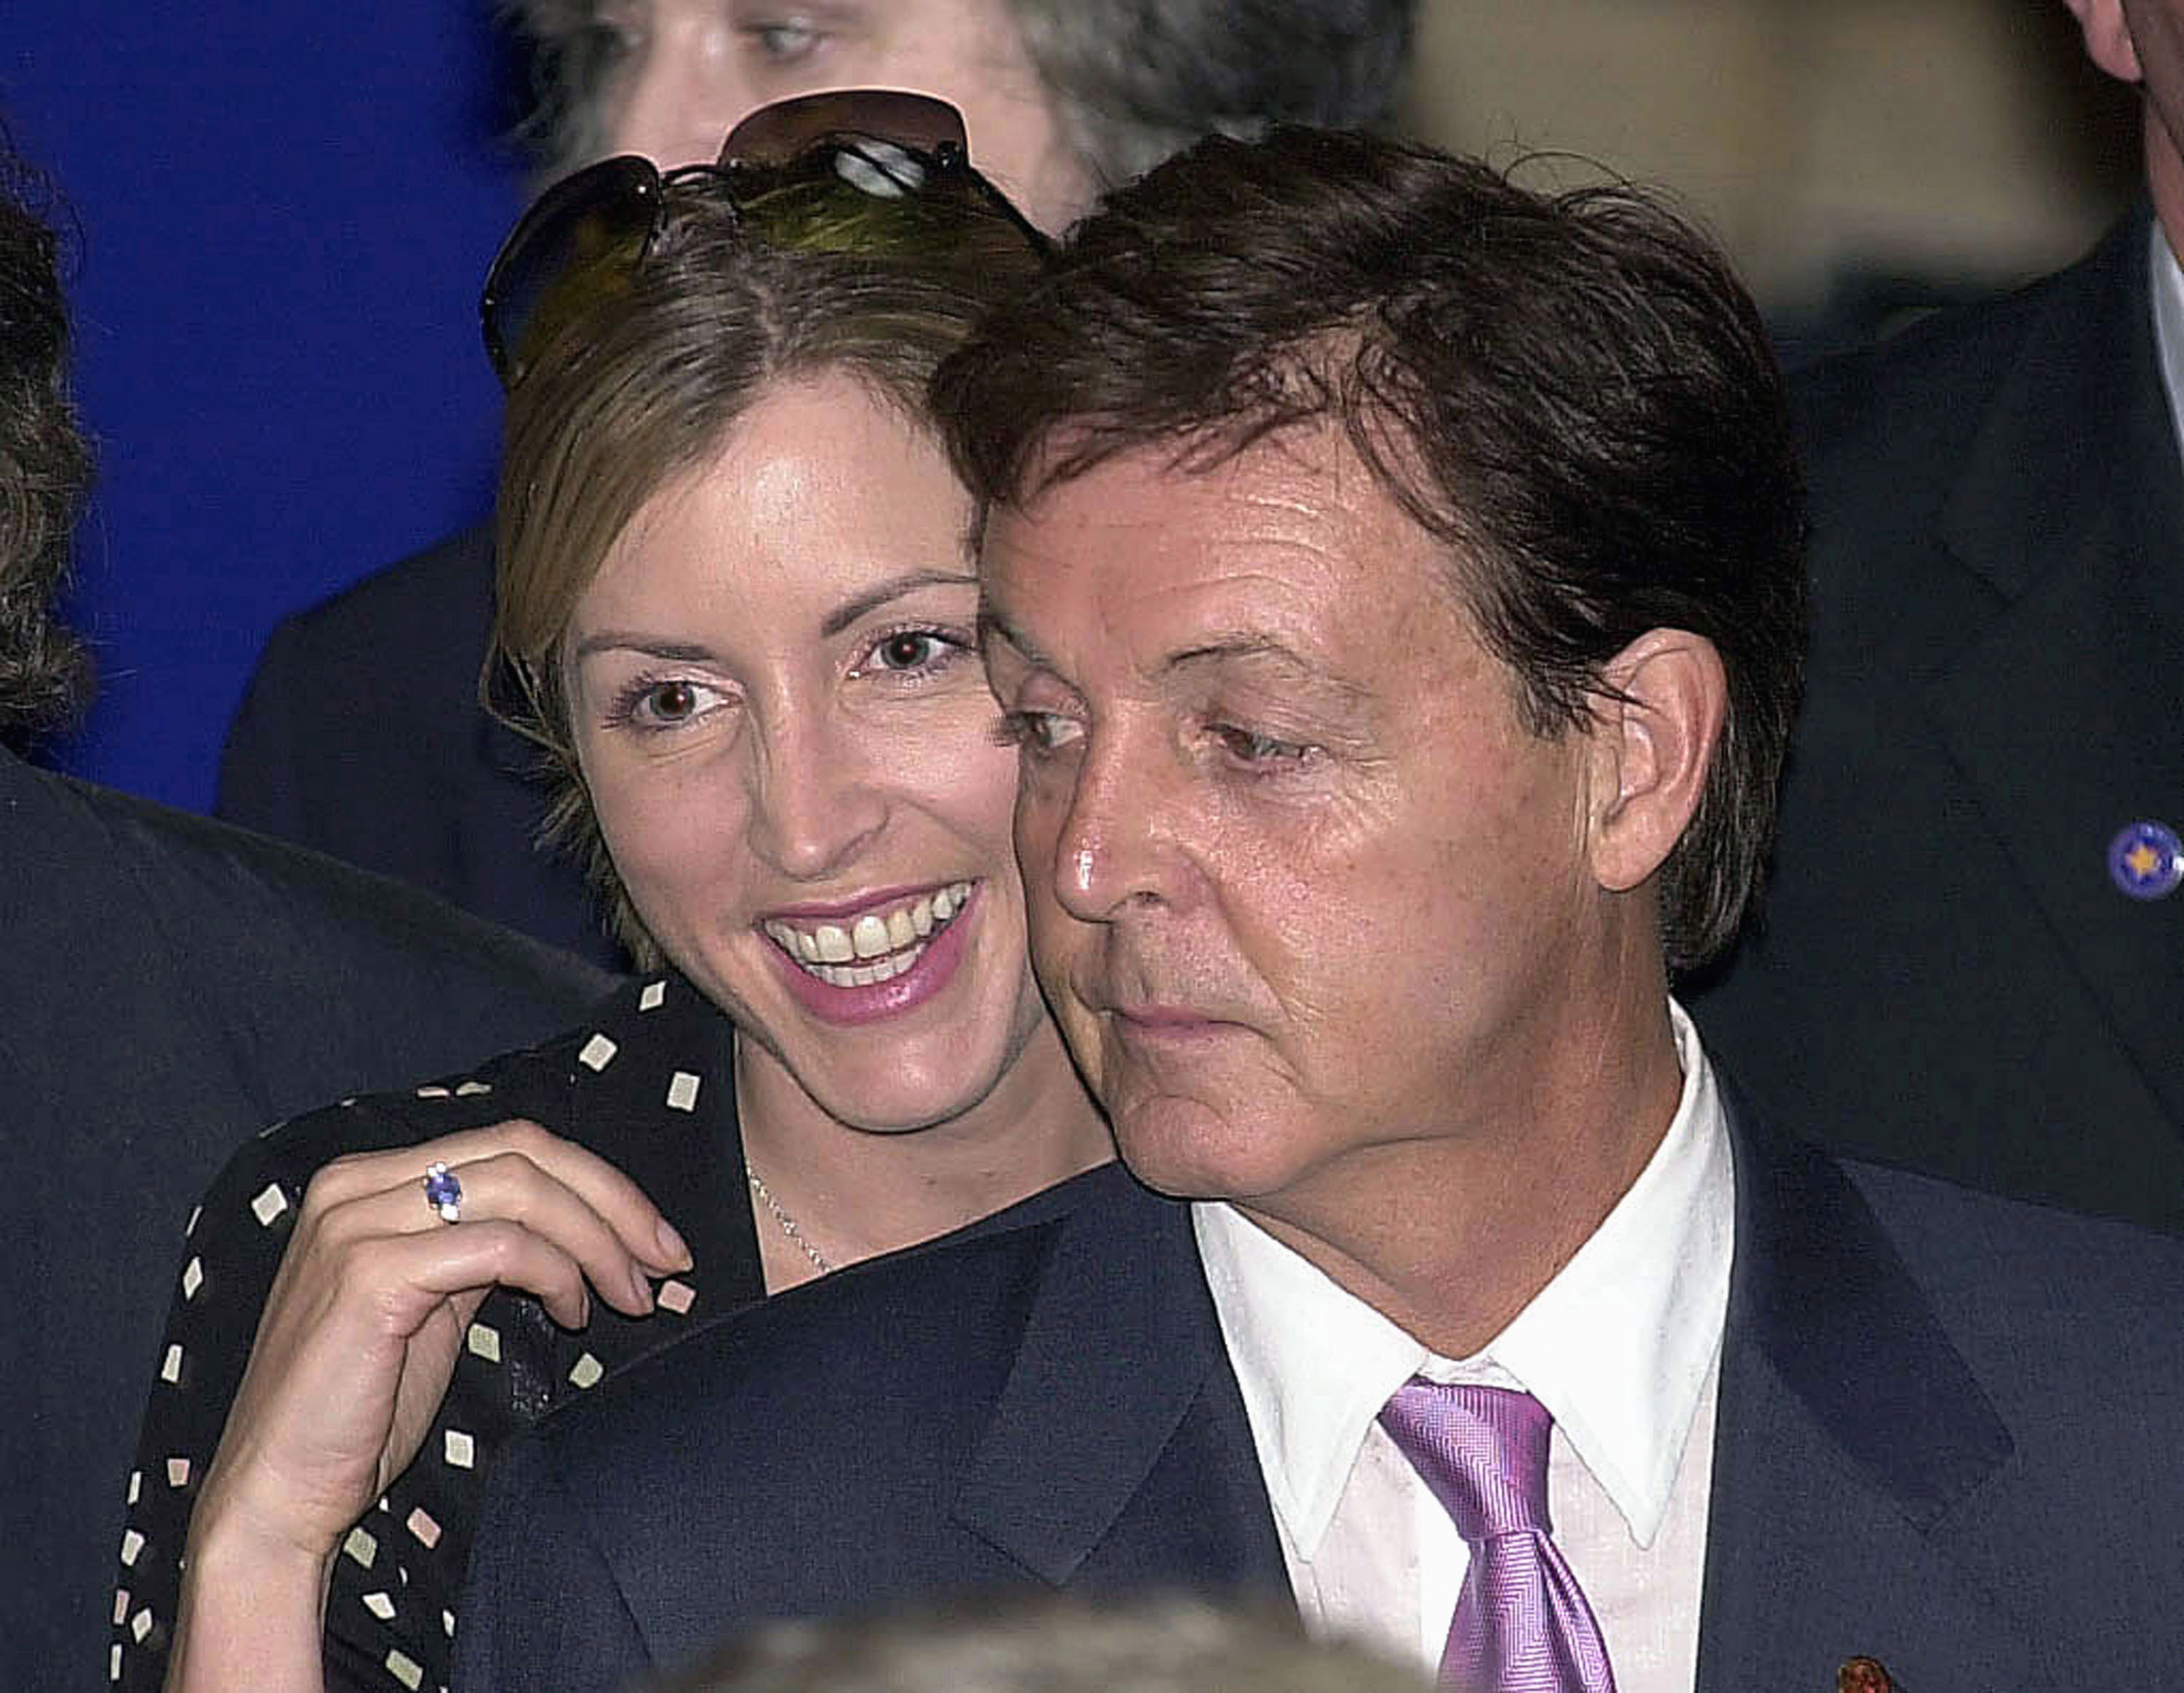 Paul McCartney and Heather Mills at the Walker Art Gallery in Liverpool on July 25, 2002 | Source: Getty Images